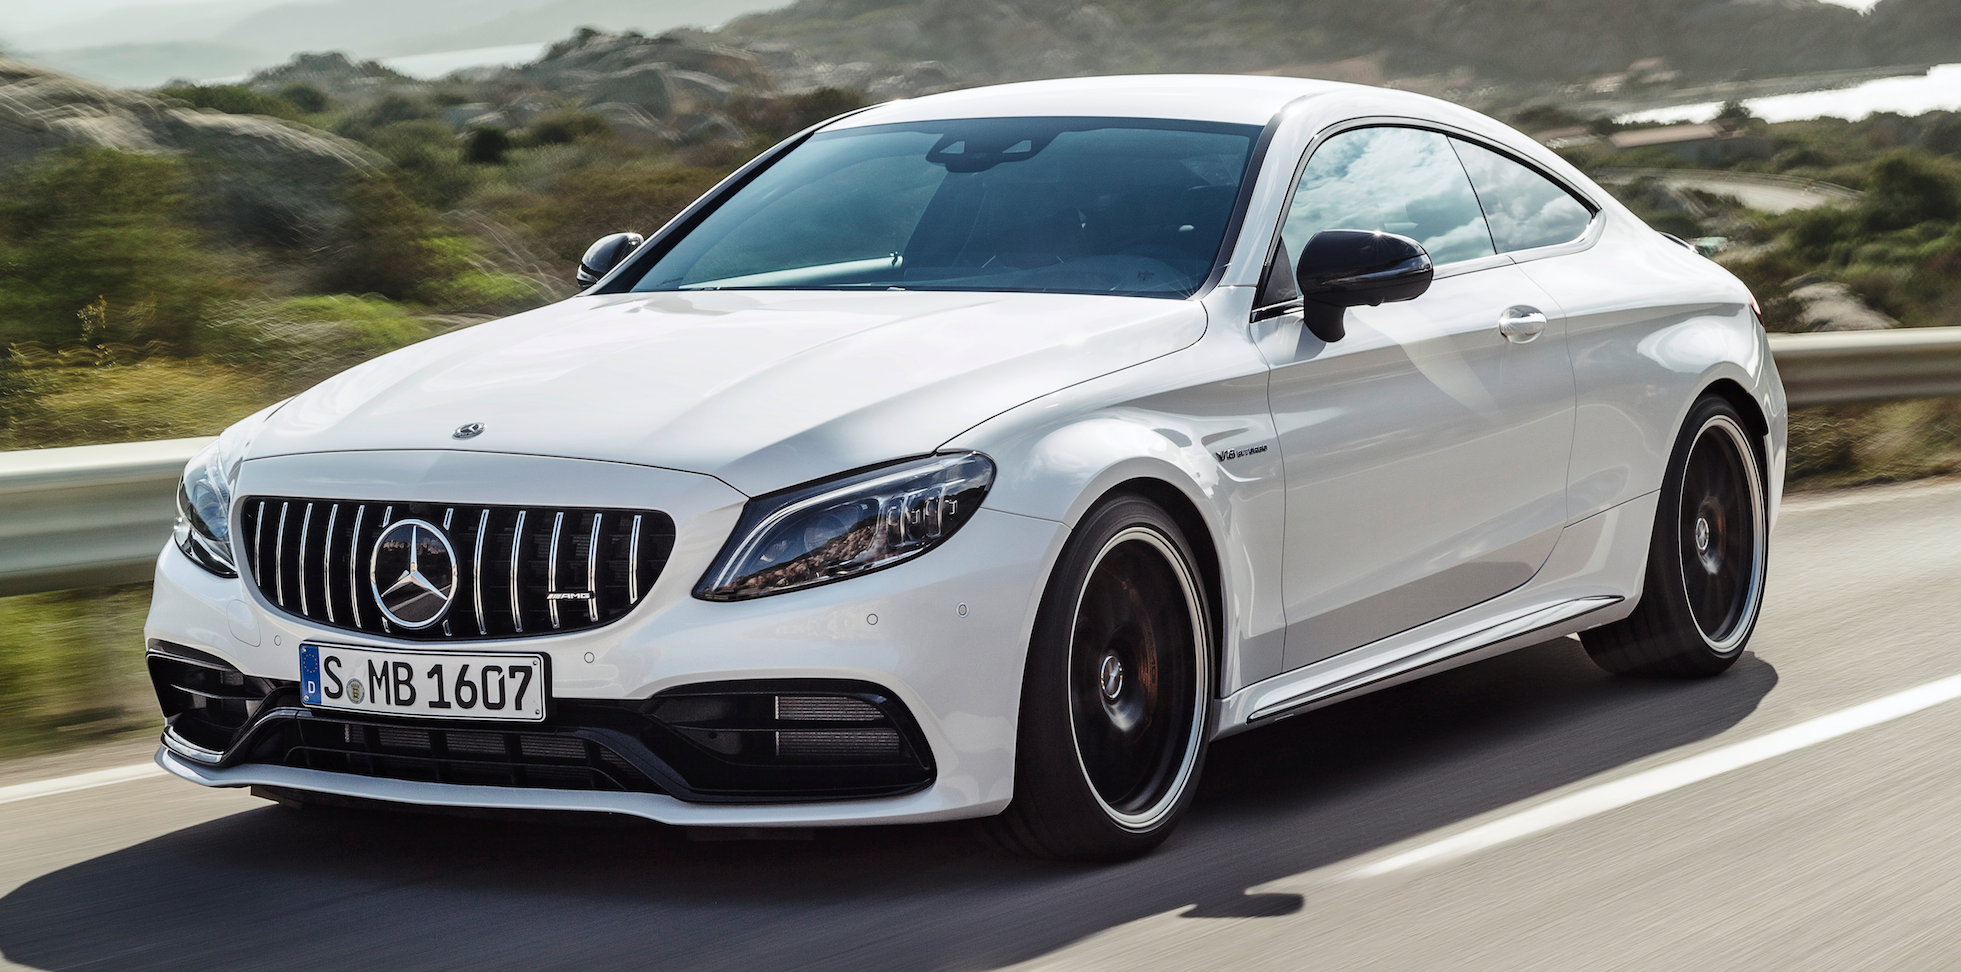 2019 Mercedes-AMG C63 Pictures, Info, and Pricing - All-New Mercedes C63  Revealed